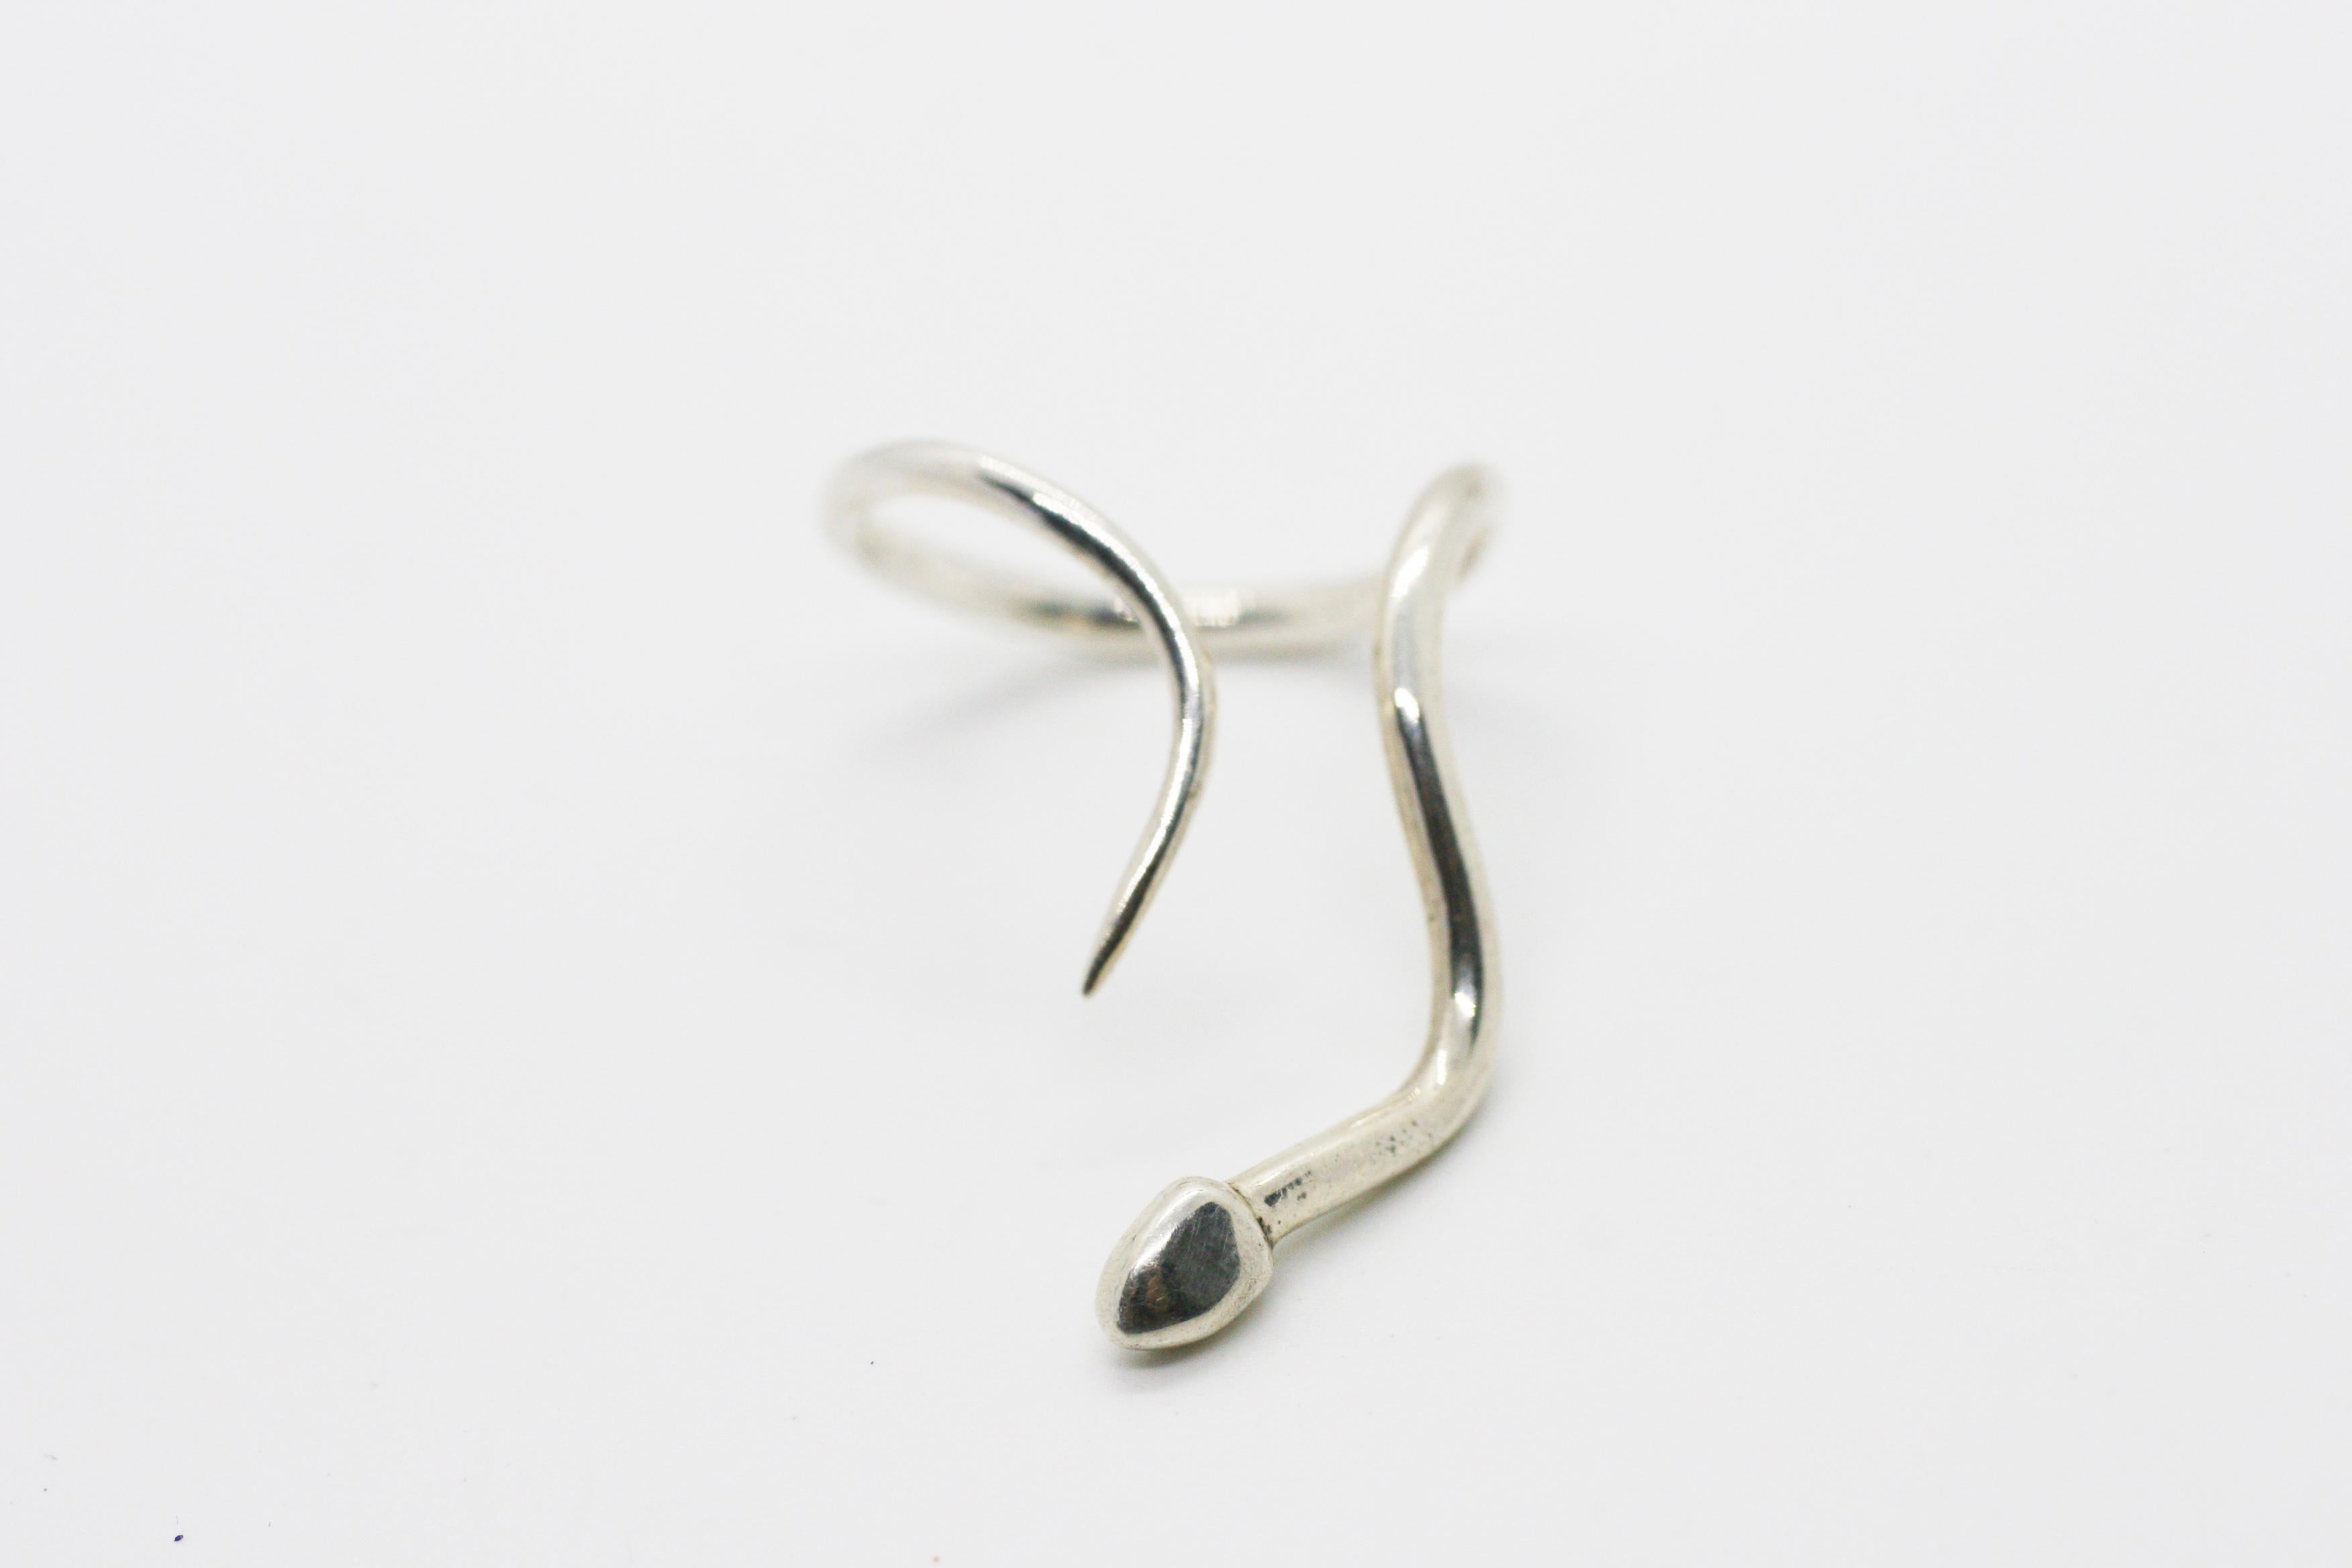 Mini Snake Ring features Perez Bitan's signature architectural curved snake set in Sterling Silver
Can be worn pointed up or down the finger 
Great piece for layering additional snake rings or bands 
